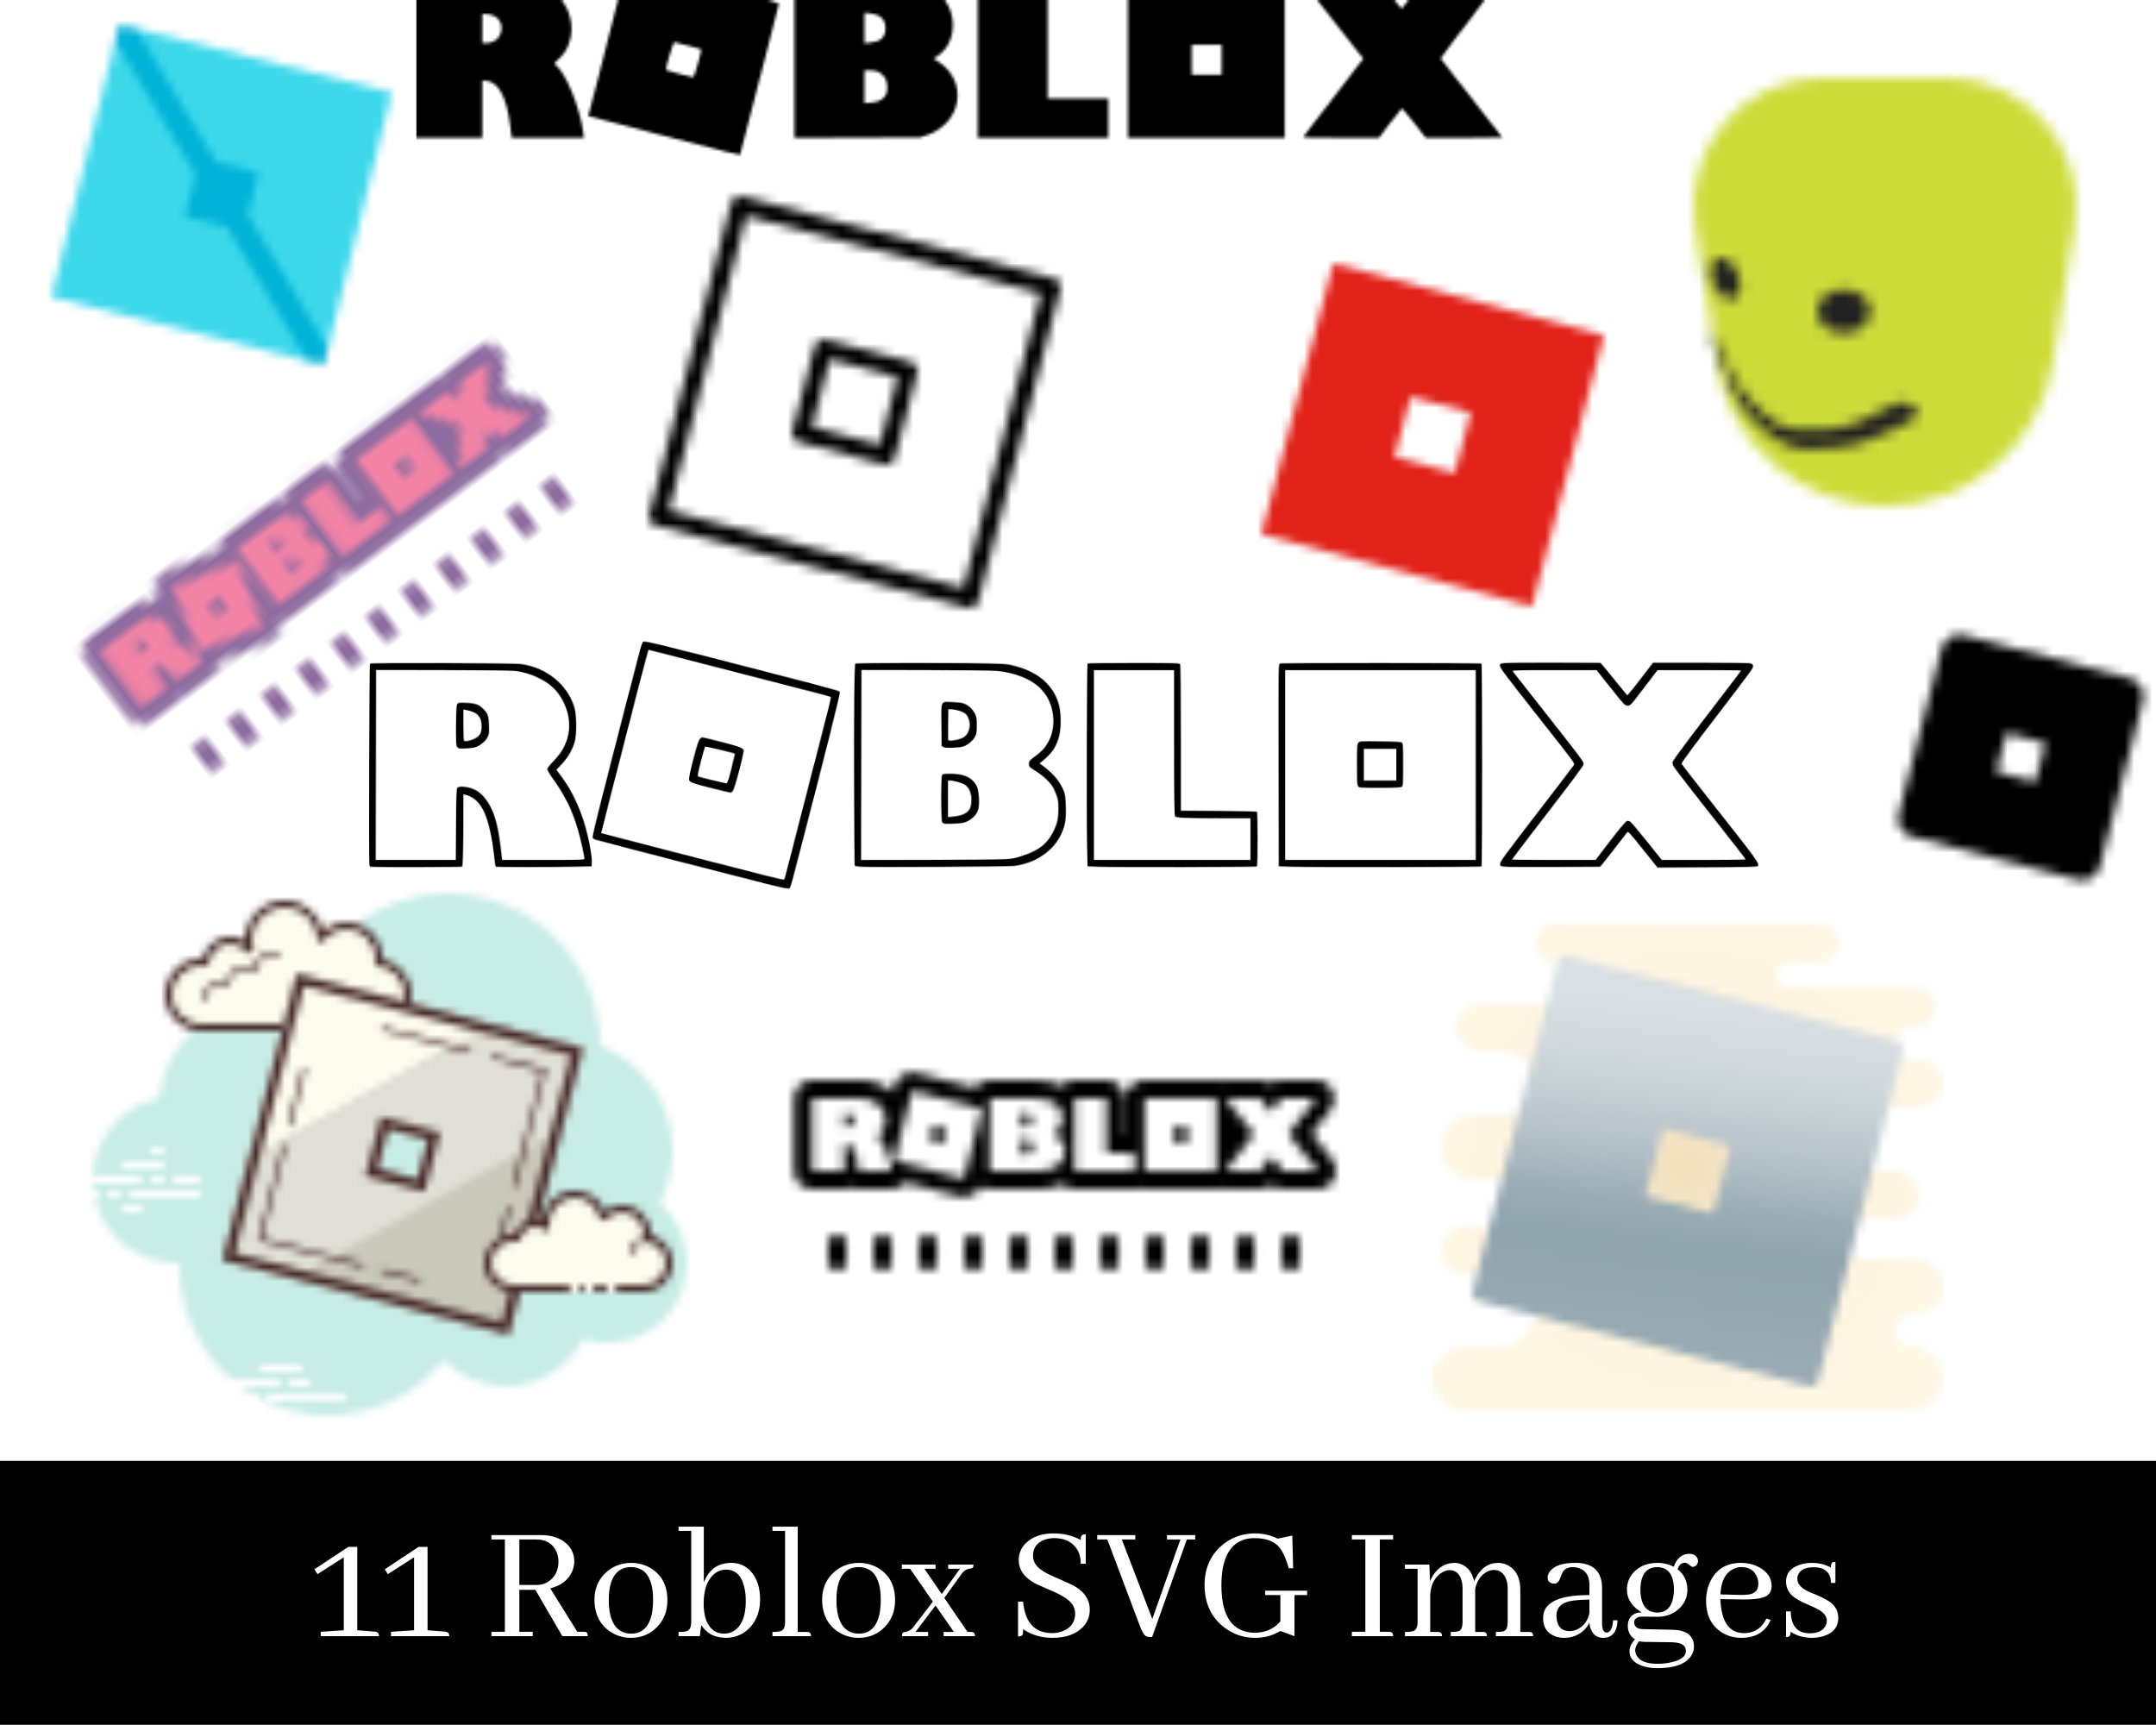 Roblox Bundle Svg, Roblox Face Svg, Roblox Character Svg, Ro